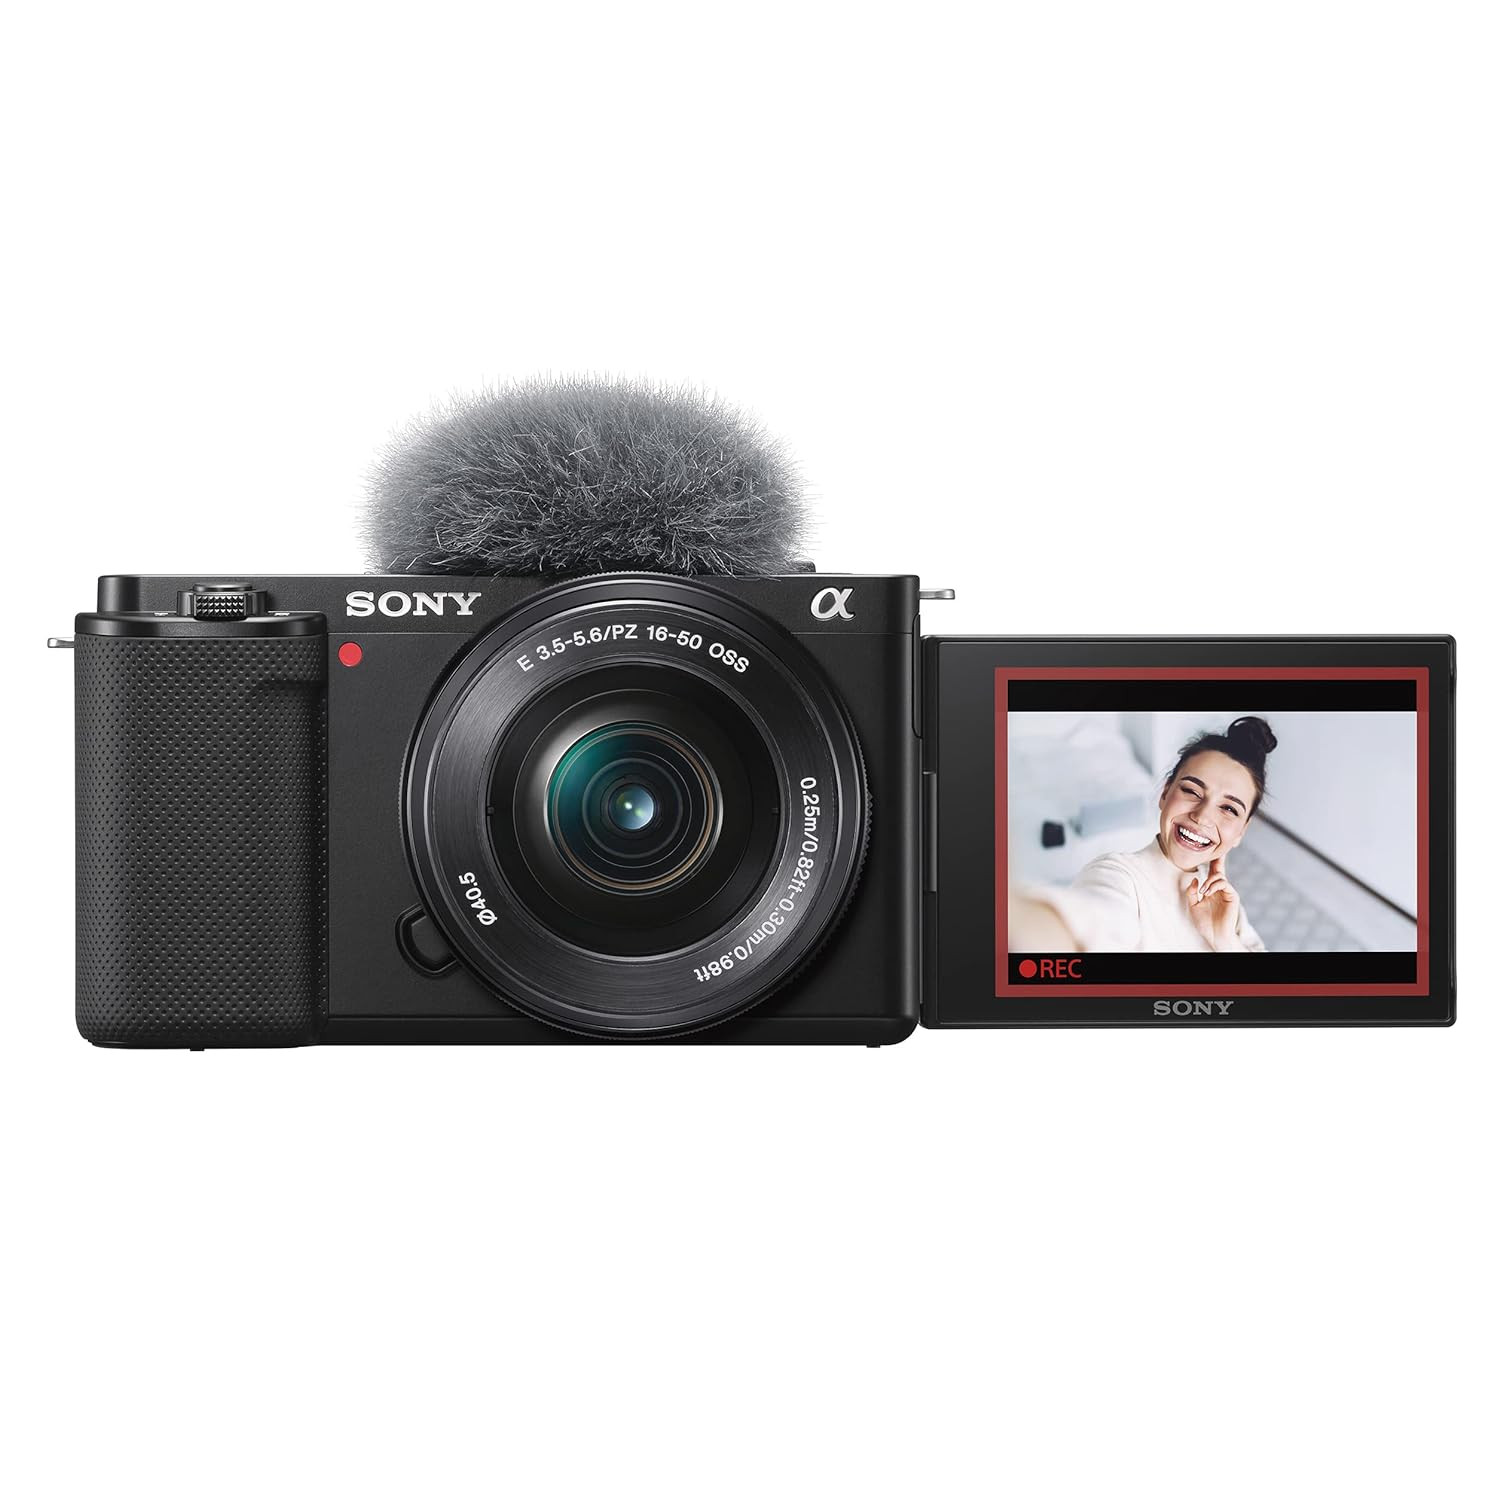 IN STOCK QTY: 1 +- BUY NOW Add to wishlist Add to compare list Email a friend SHARE: SHARE ON TWITTER SHARE ON FACEBOOK SHARE ON PINTEREST SONY ALPHA 1 MIRRORLESS CAMERA (BODY ONLY)